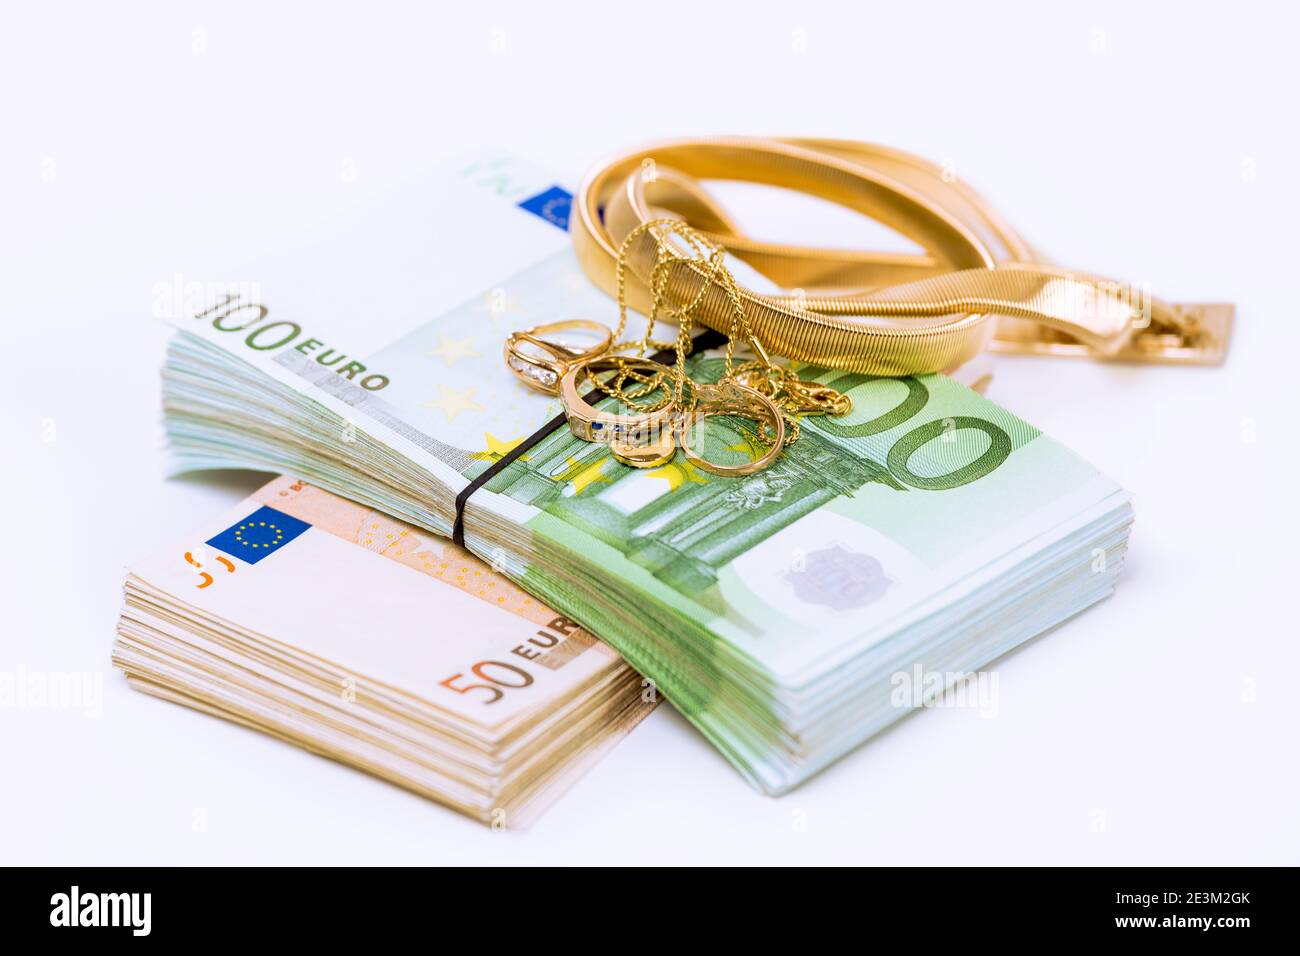 Gold and money. Stack pile of European union currency bills, euro banknotes and a bunch of golden jewelry isolated on white background. Savings bank a Stock Photo